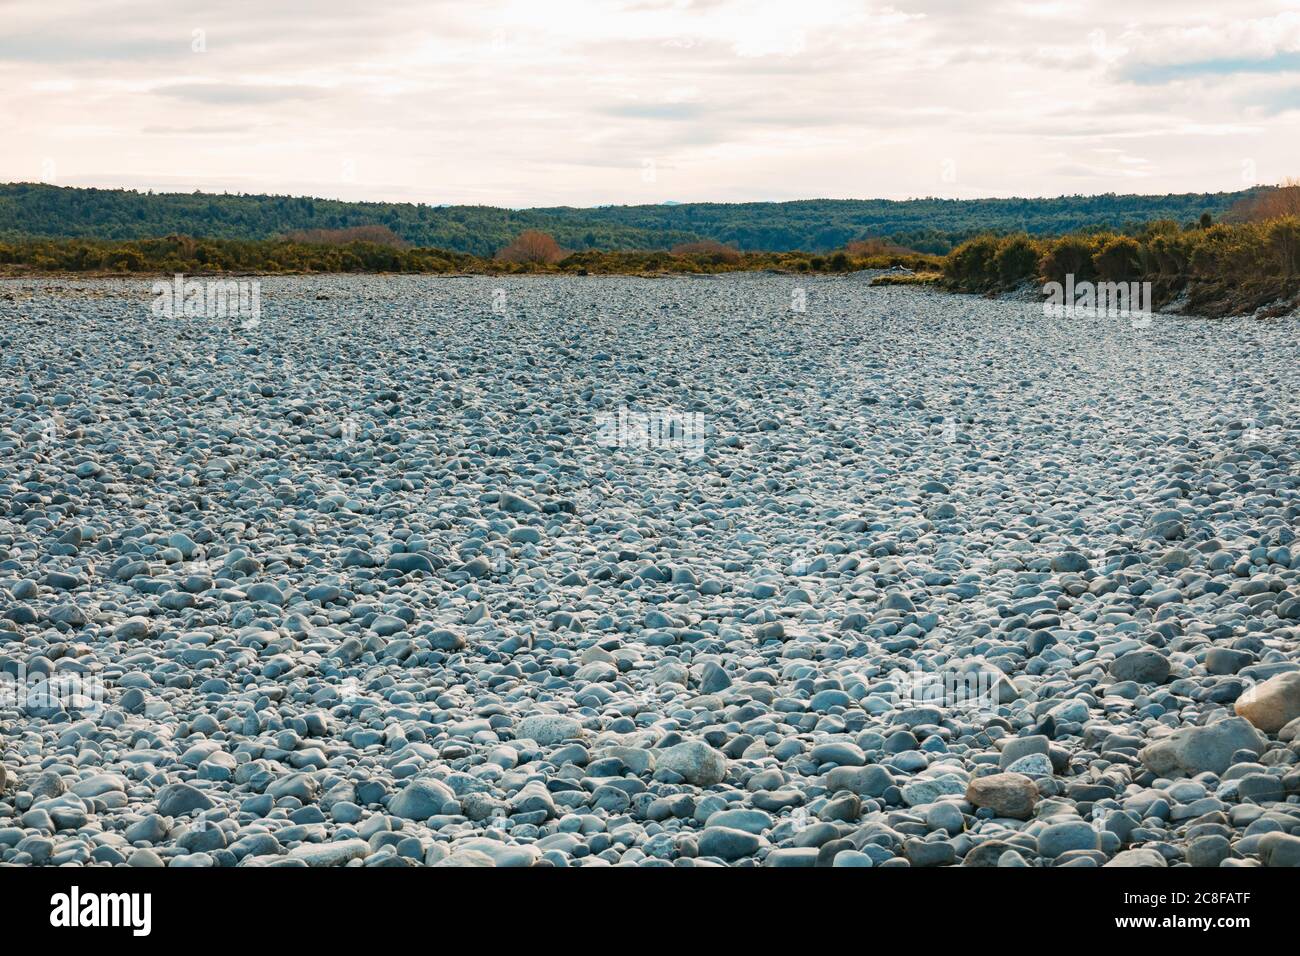 Stones on a completely dry riverbed near Ahaura, West Coast, New Zealand Stock Photo